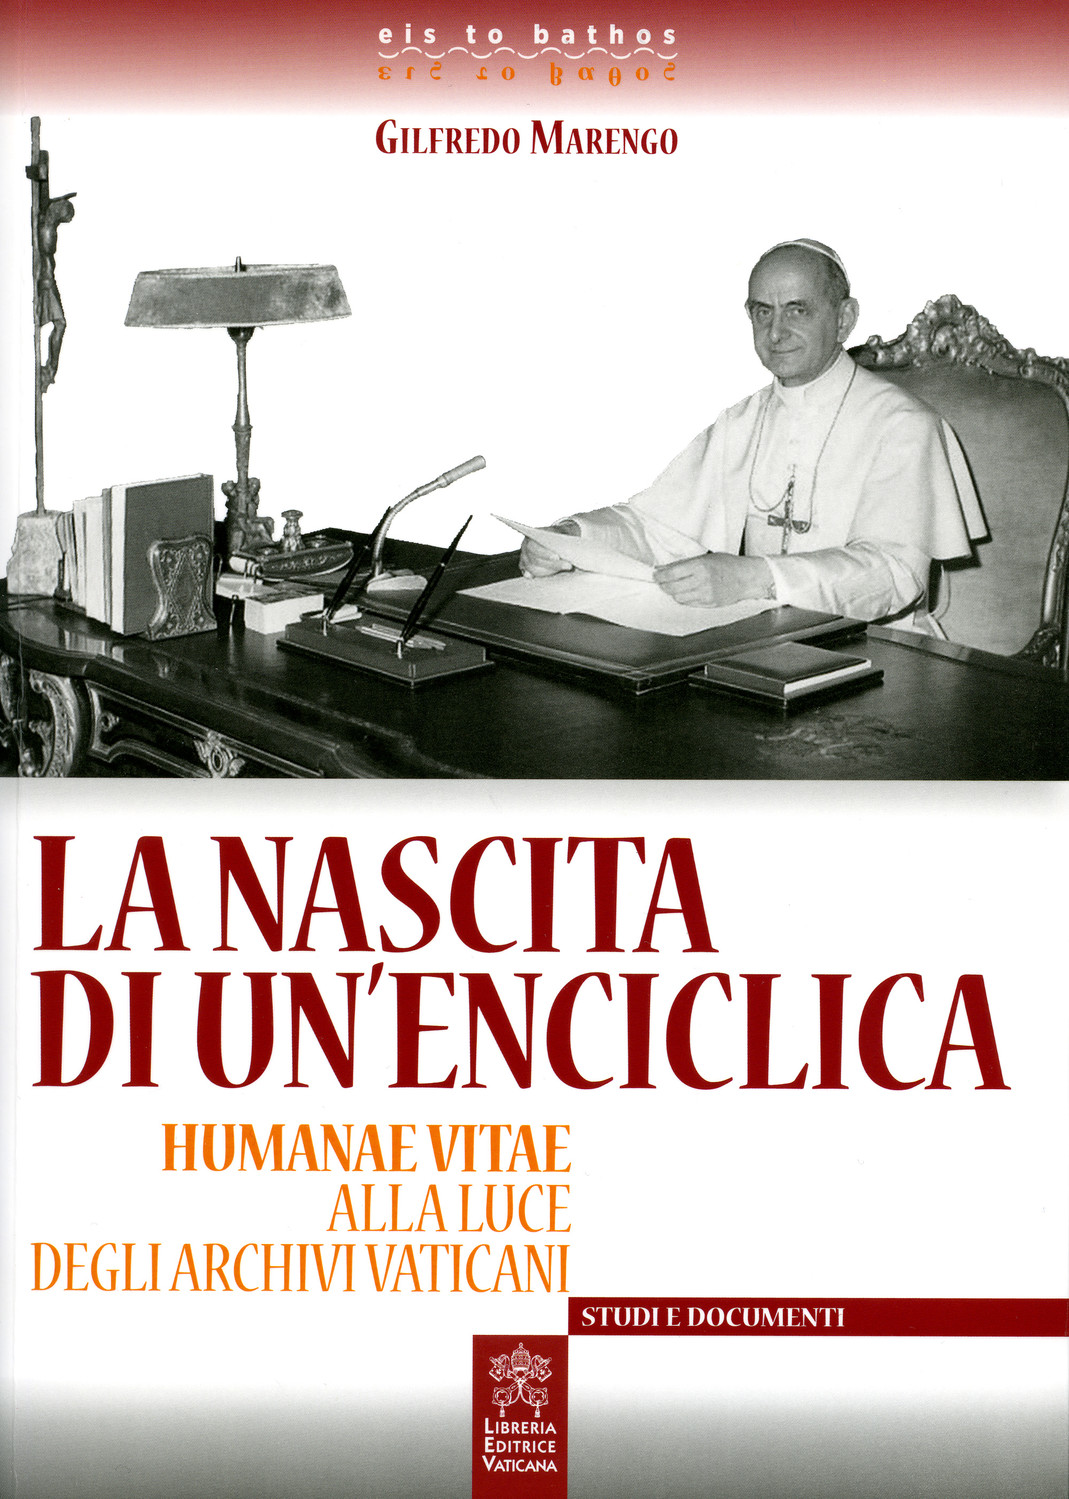 This is the cover of the Italian book, “The Birth of an Encyclical: ‘Humanae Vitae’ in the Light of the Vatican Archives.” The book is by Monsignor Gilfredo Marengo, who was given special access by Pope Francis to research “Humane Vitae” in the Vatican Archives.